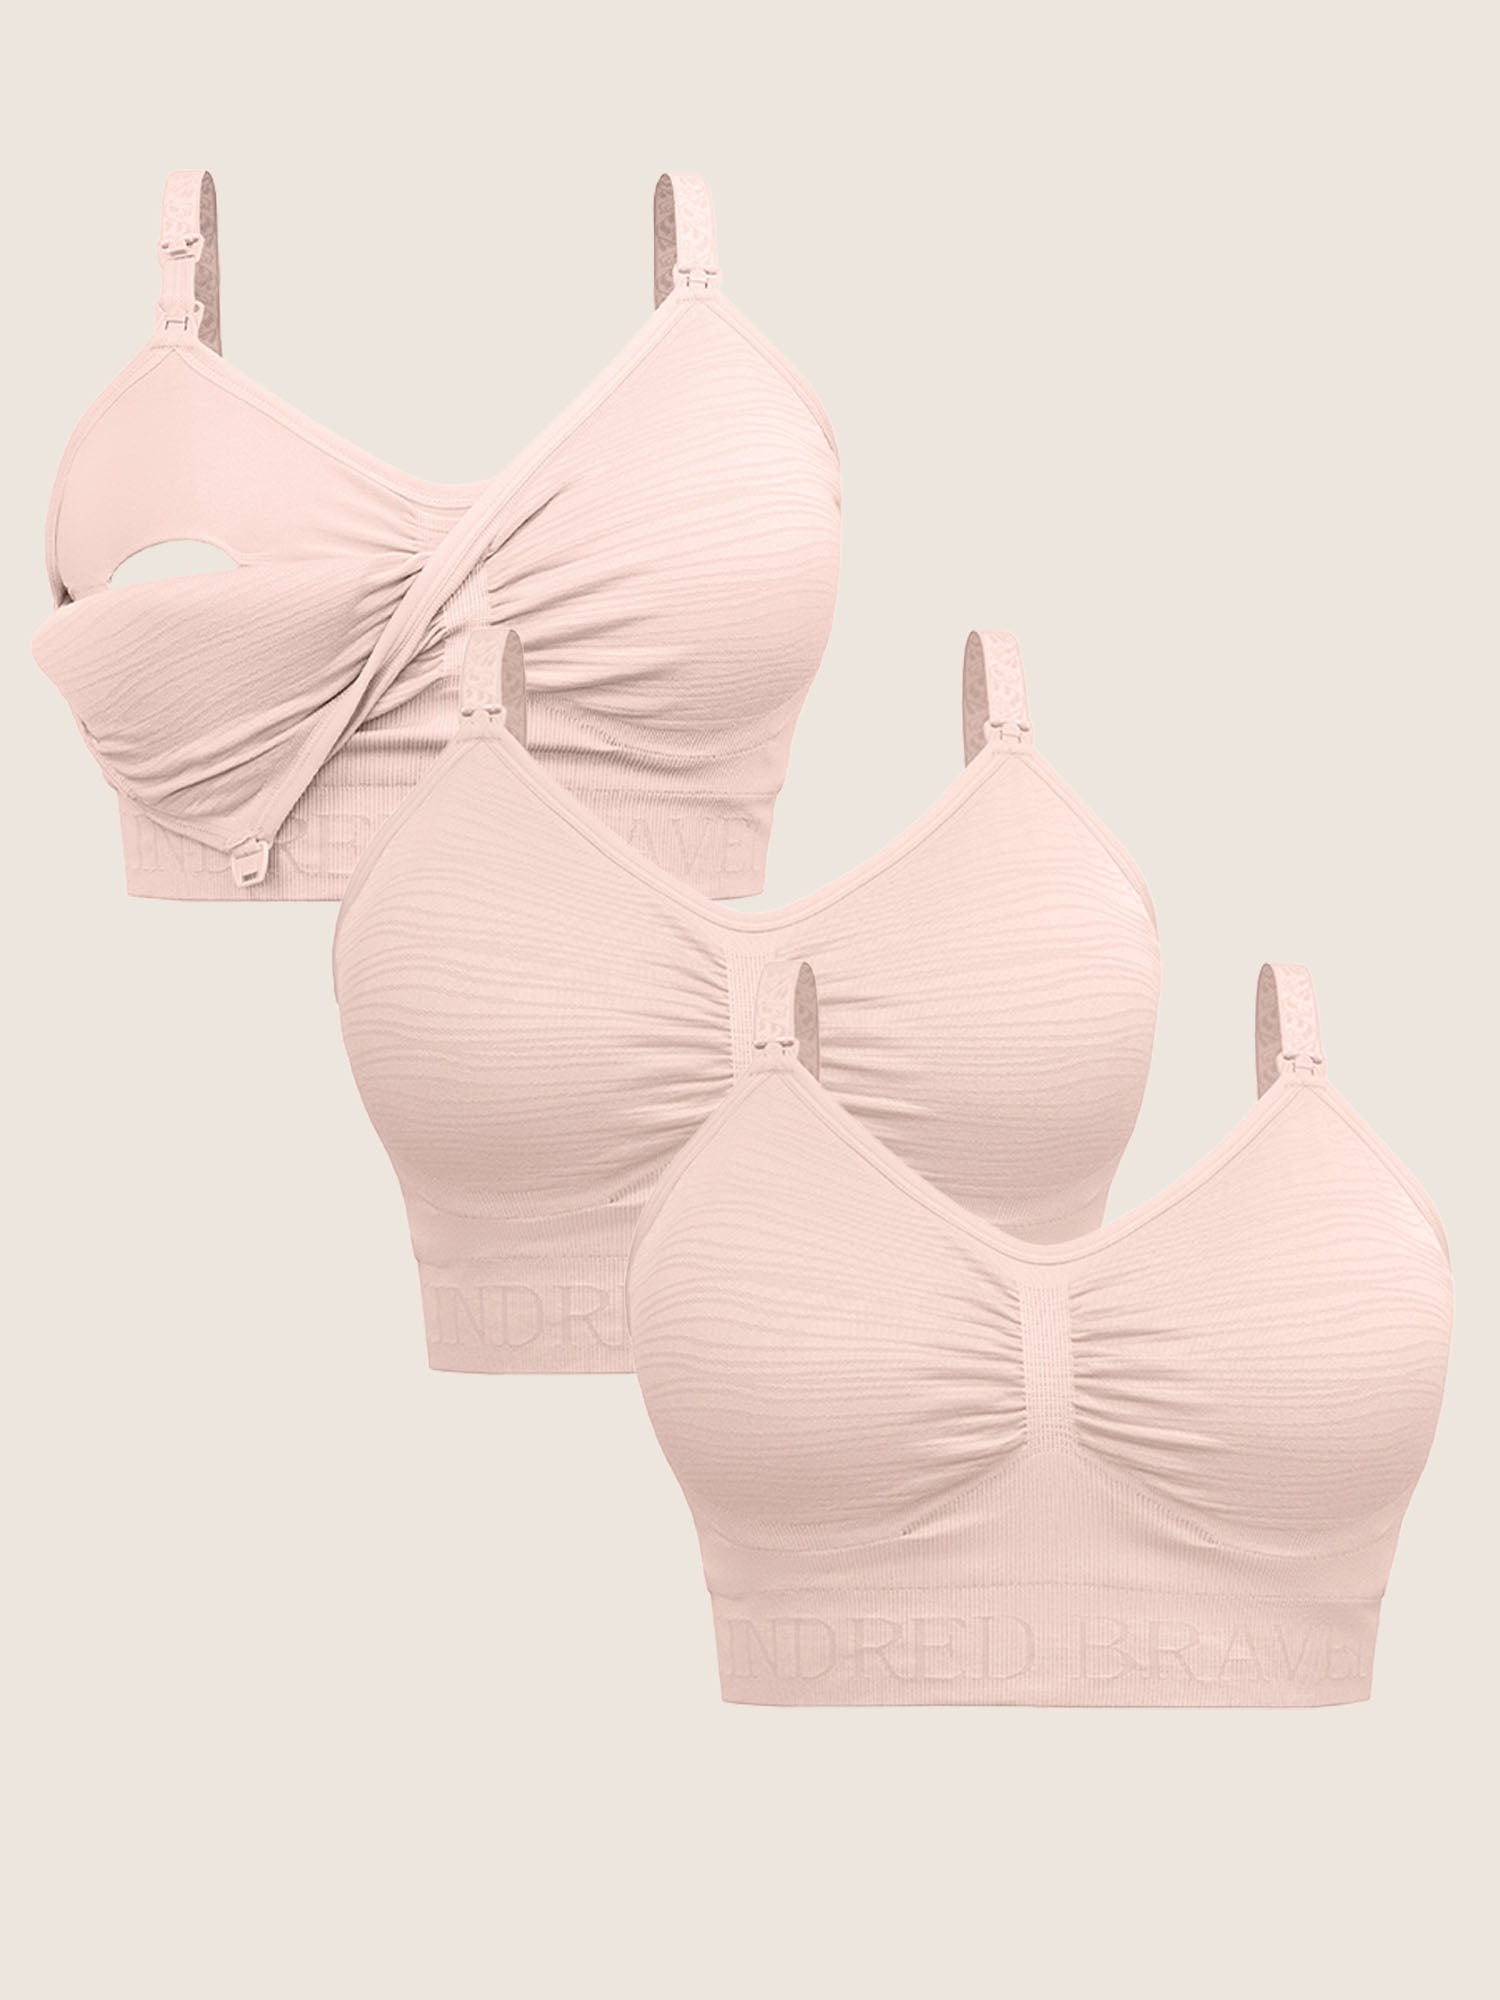 Kindred Bravely Sublime Hands Free Pumping Bra - Pink Heather